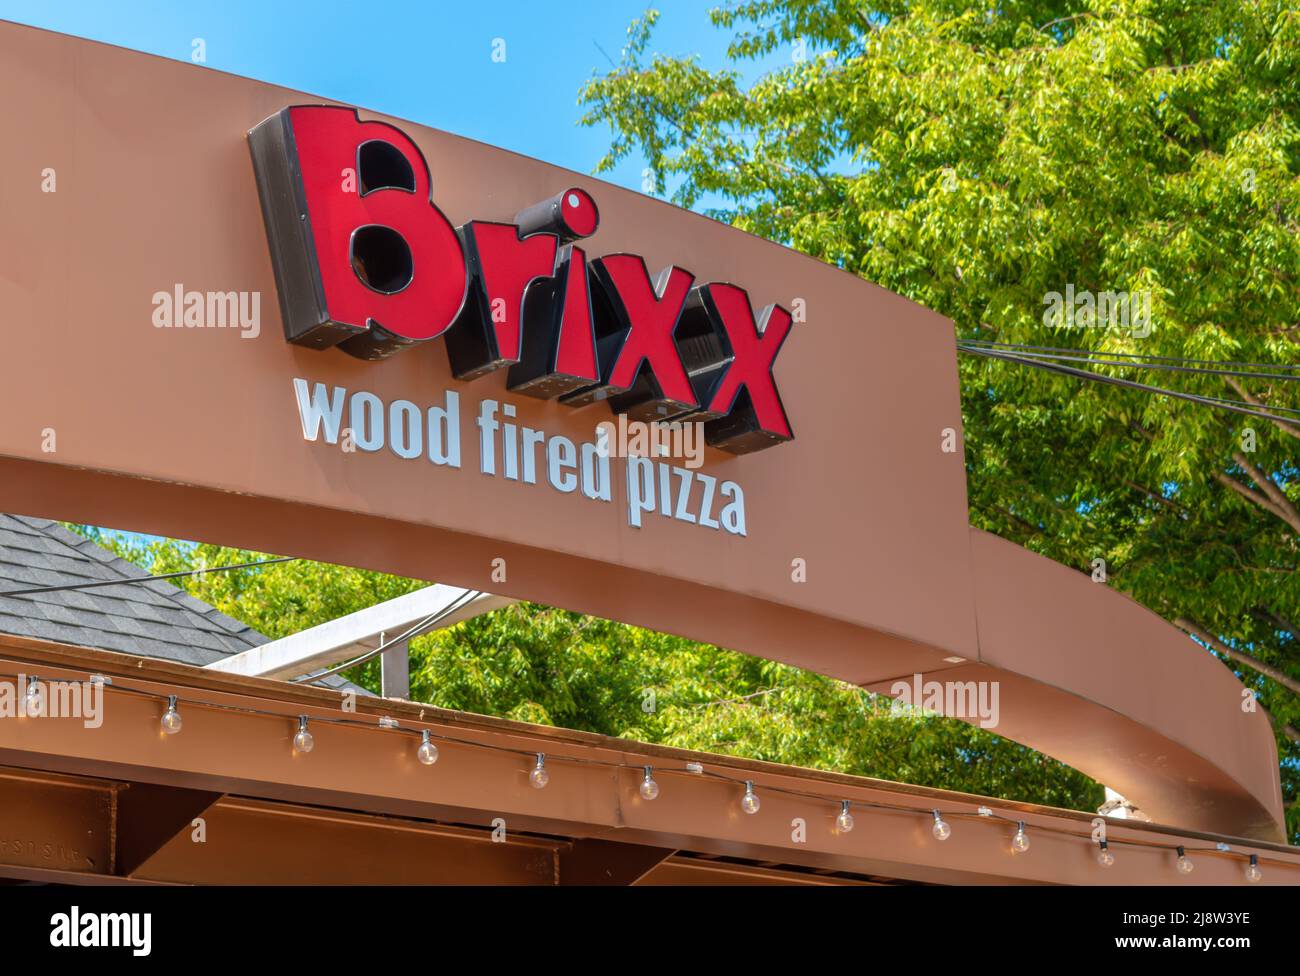 Exterior facade brand and logo signage for 'Brixx' wood fired pizza store on a bright sunny day with shadows, green trees leaves and a clear blue sky. Stock Photo